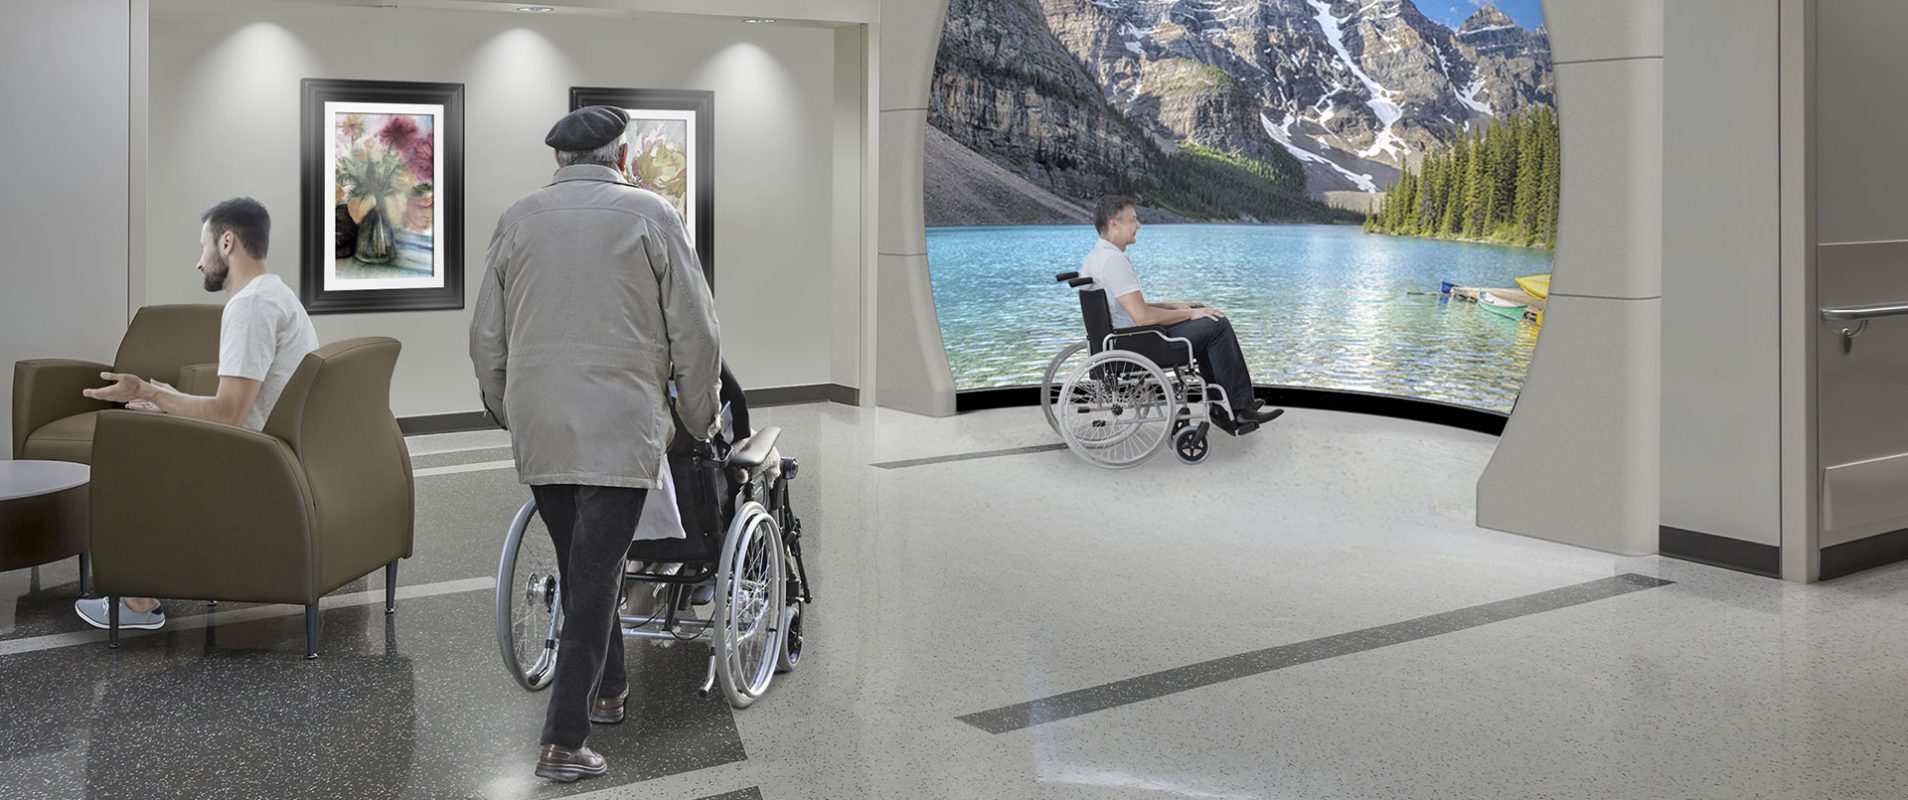 Your medical rehabilitation center is getting an upgrade